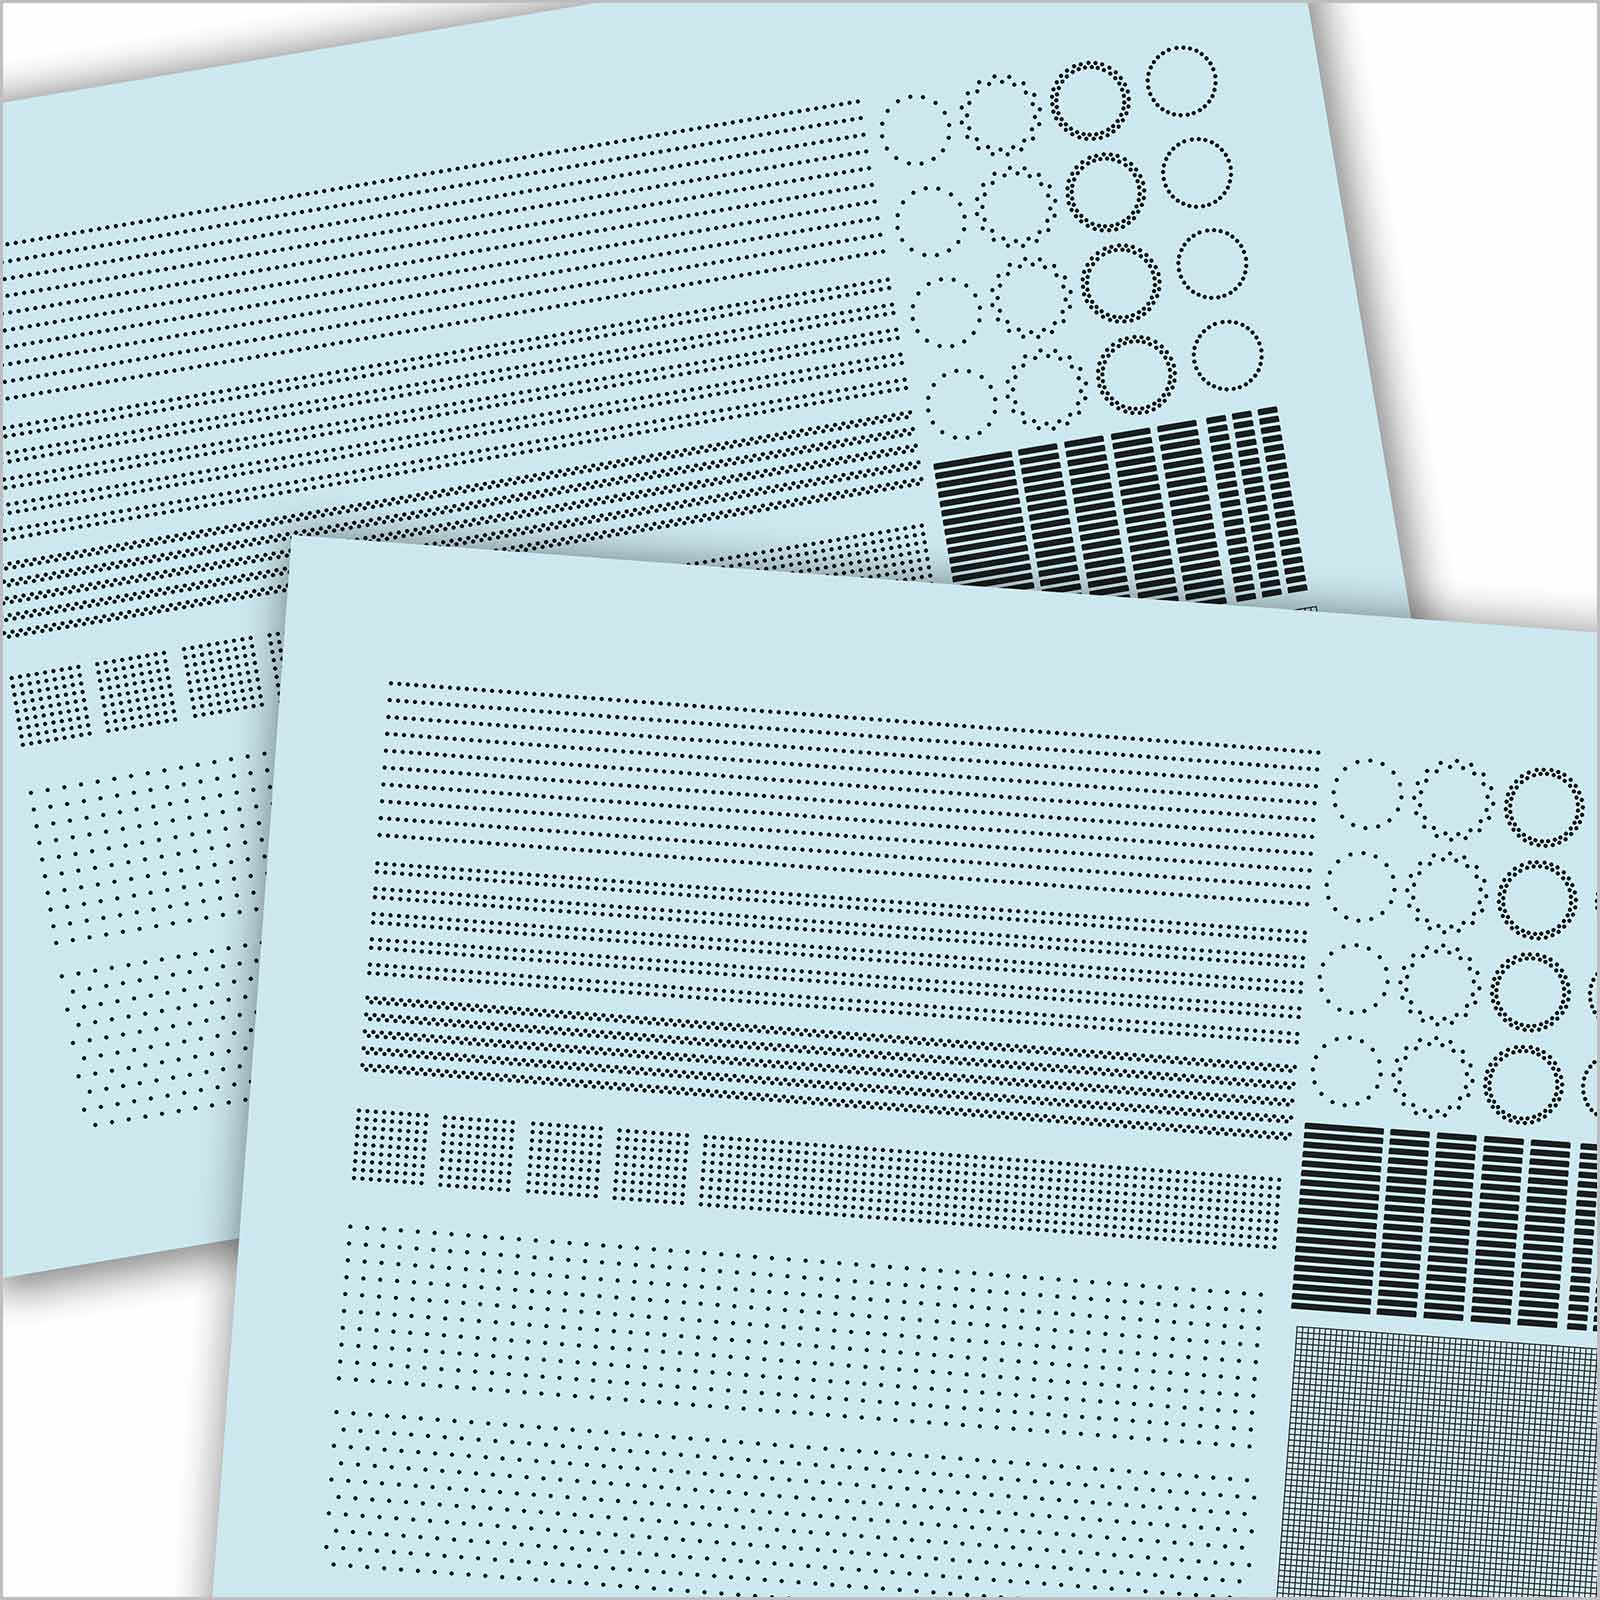 O scale decals with raised 3D rivets and other surface details